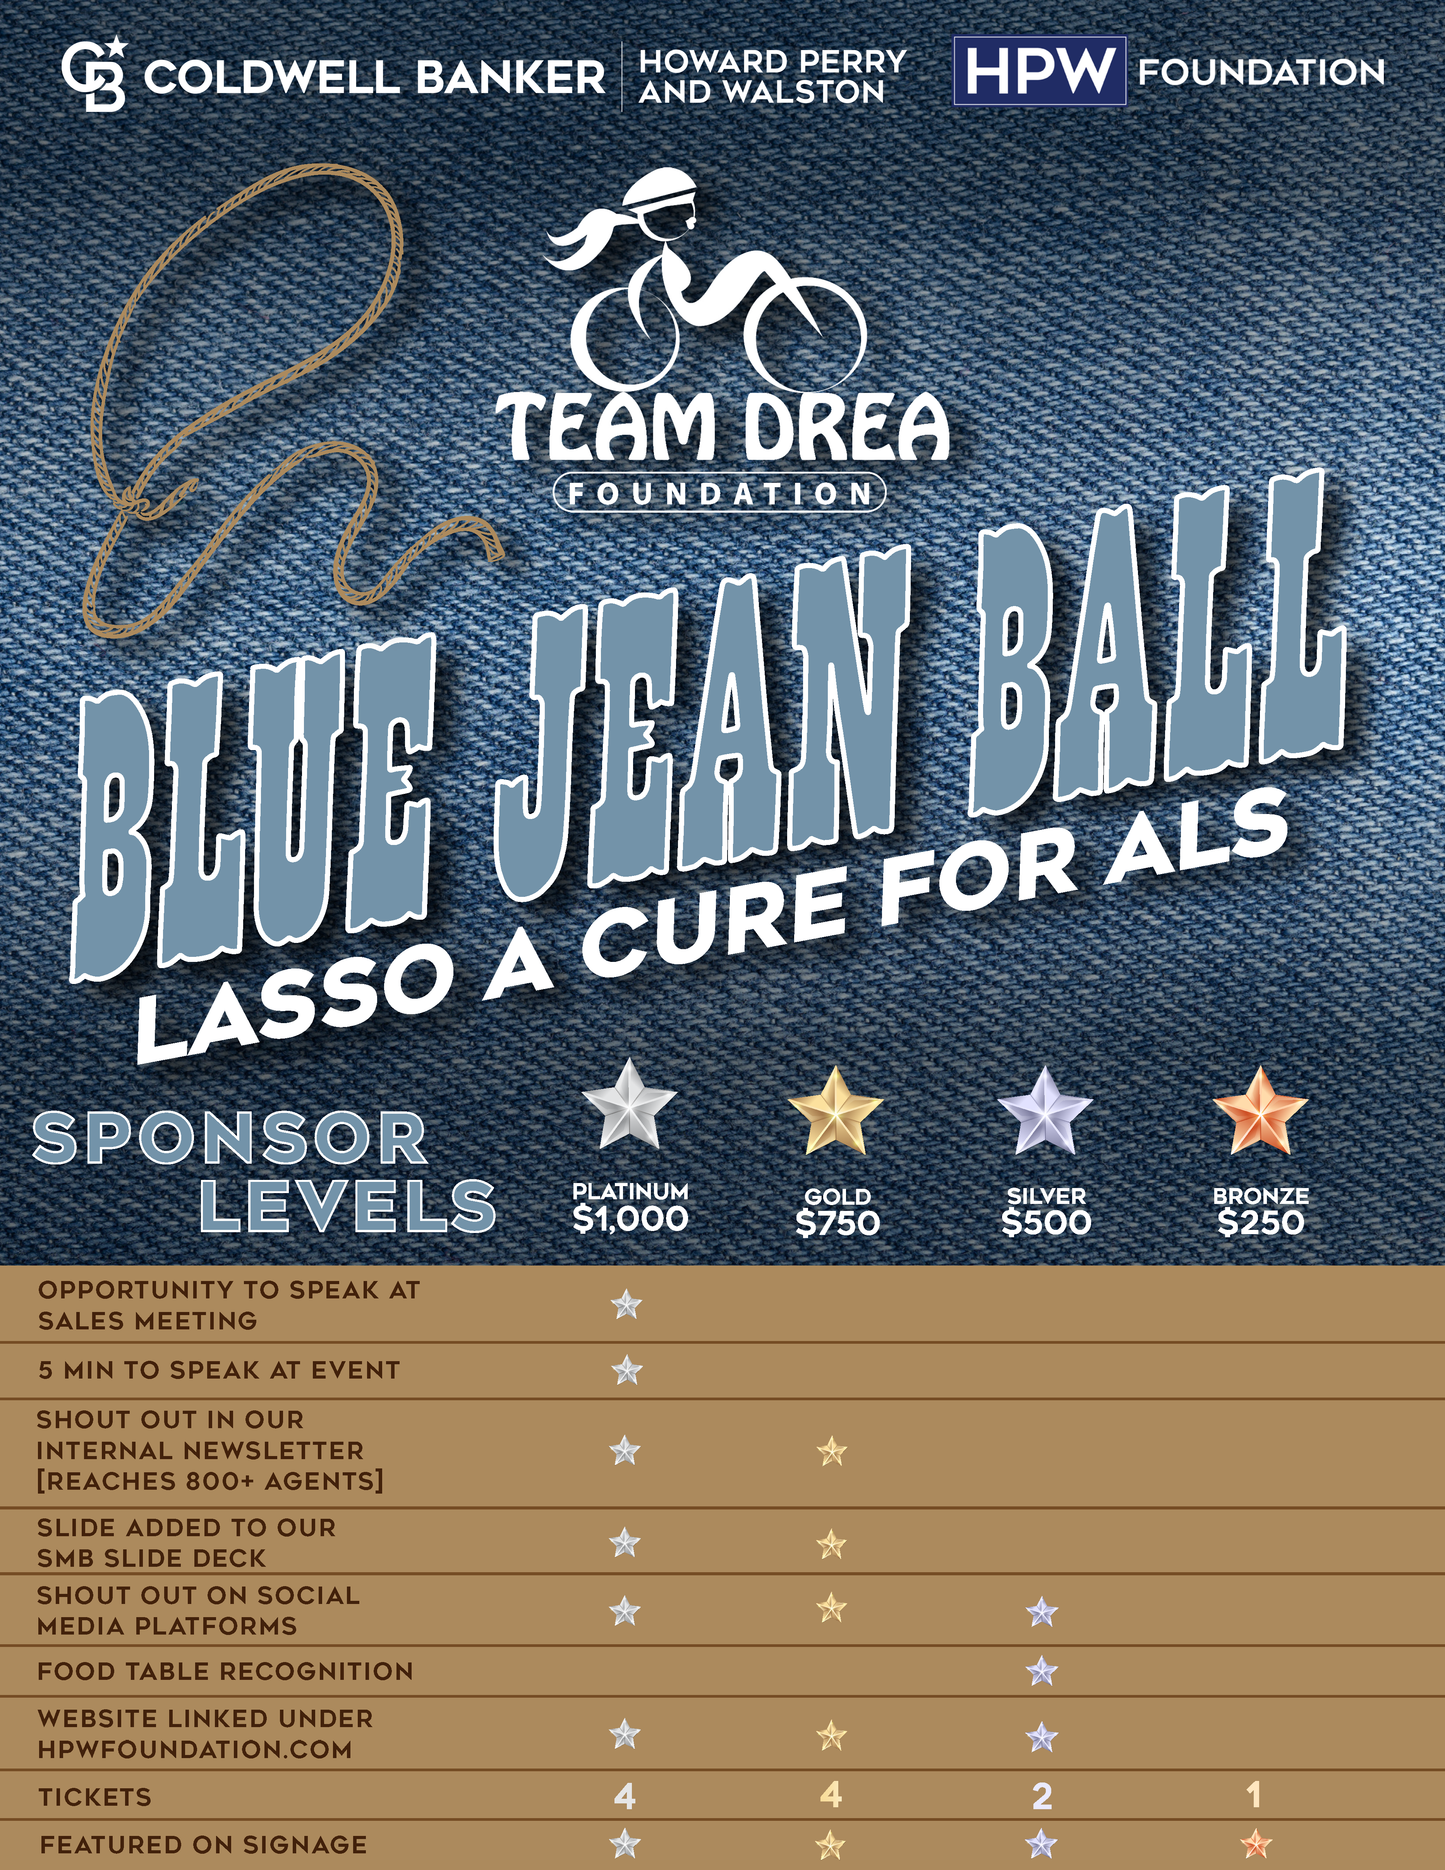 Blue Jean Ball: Lasso a Cure for ALS Sponsorship 2024